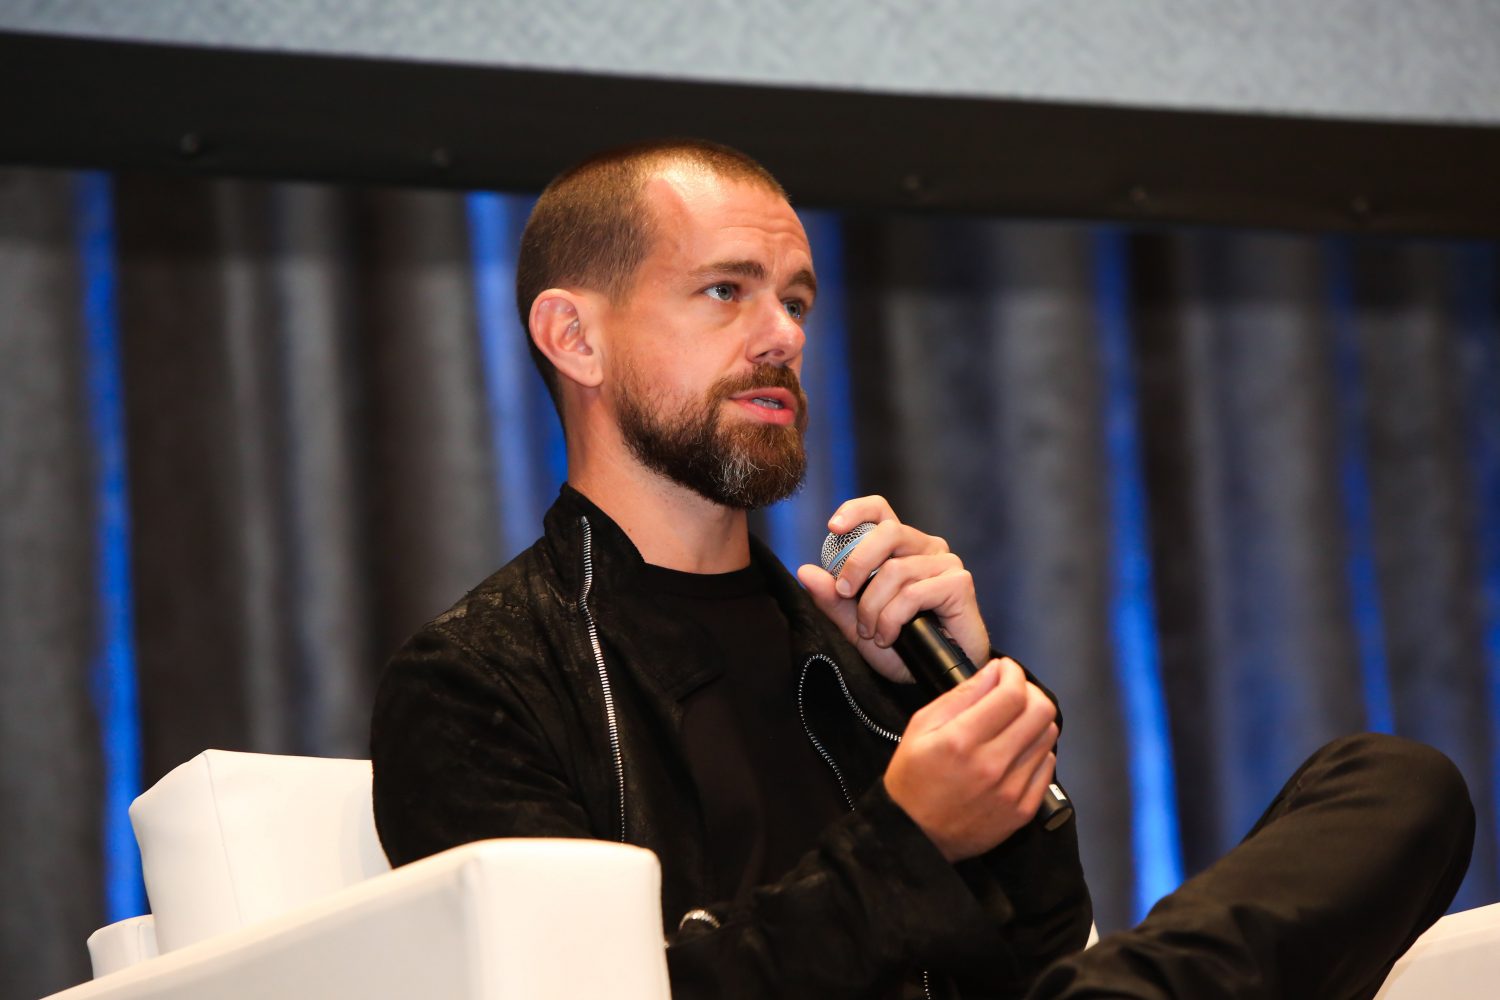 Jack Dorsey Announces New Twitter Team: Square Crypto, But For Social Media